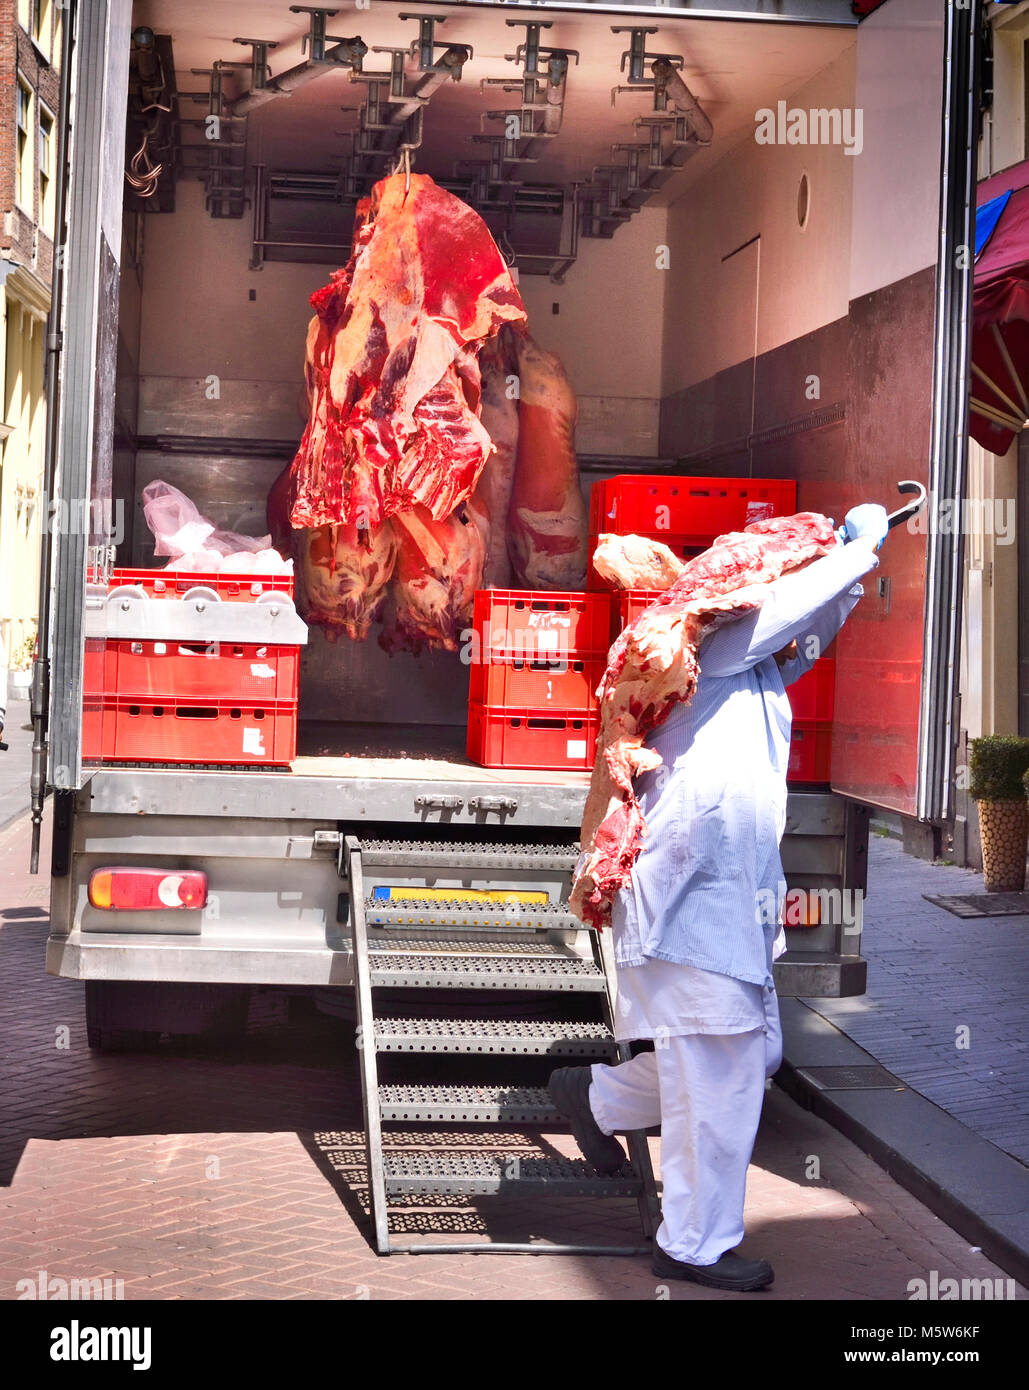 Food delivery of raw beef or pork, half beef in a cooling truck. Fresh red meat, buttery or slaughter house theme. Meat transporter, food industry. Stock Photo